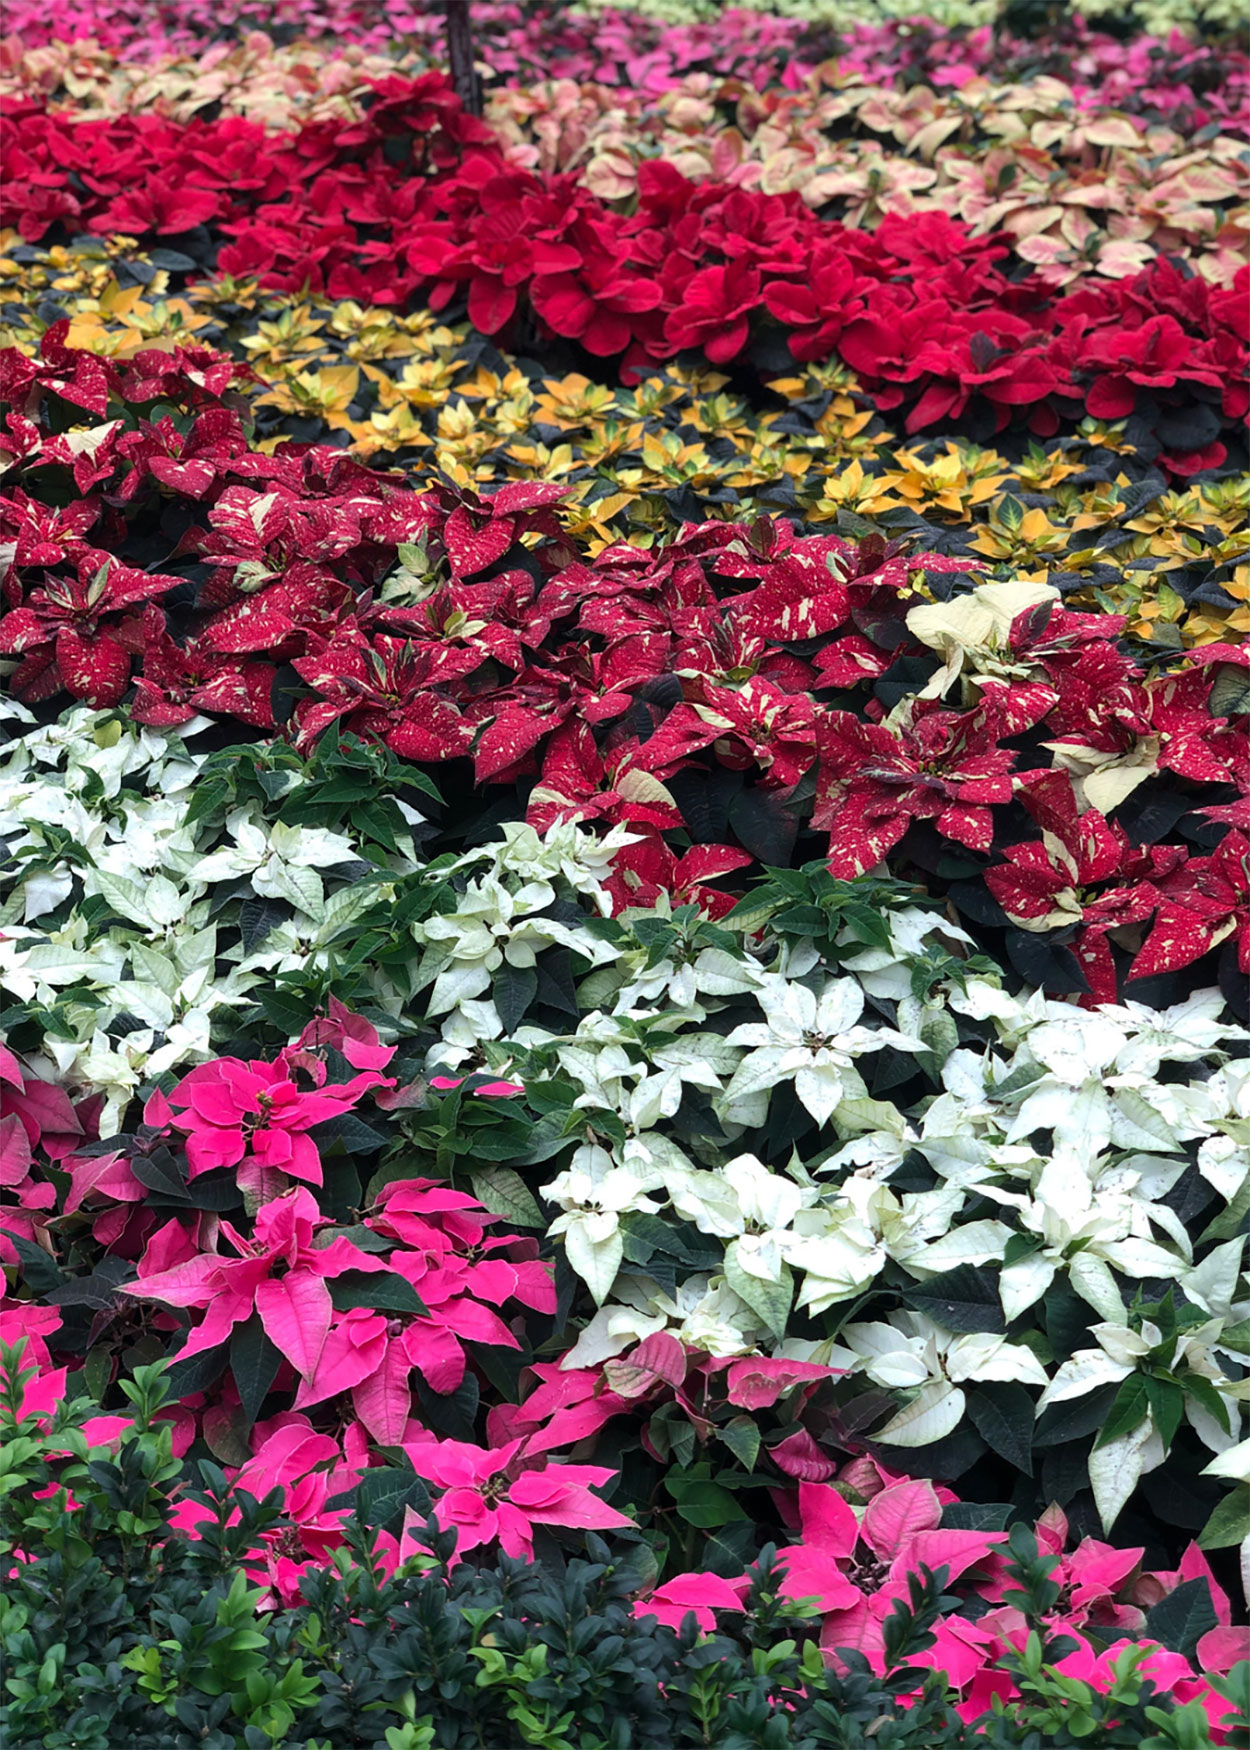 Variety of colorful poinsettia plants on display at a retail store.